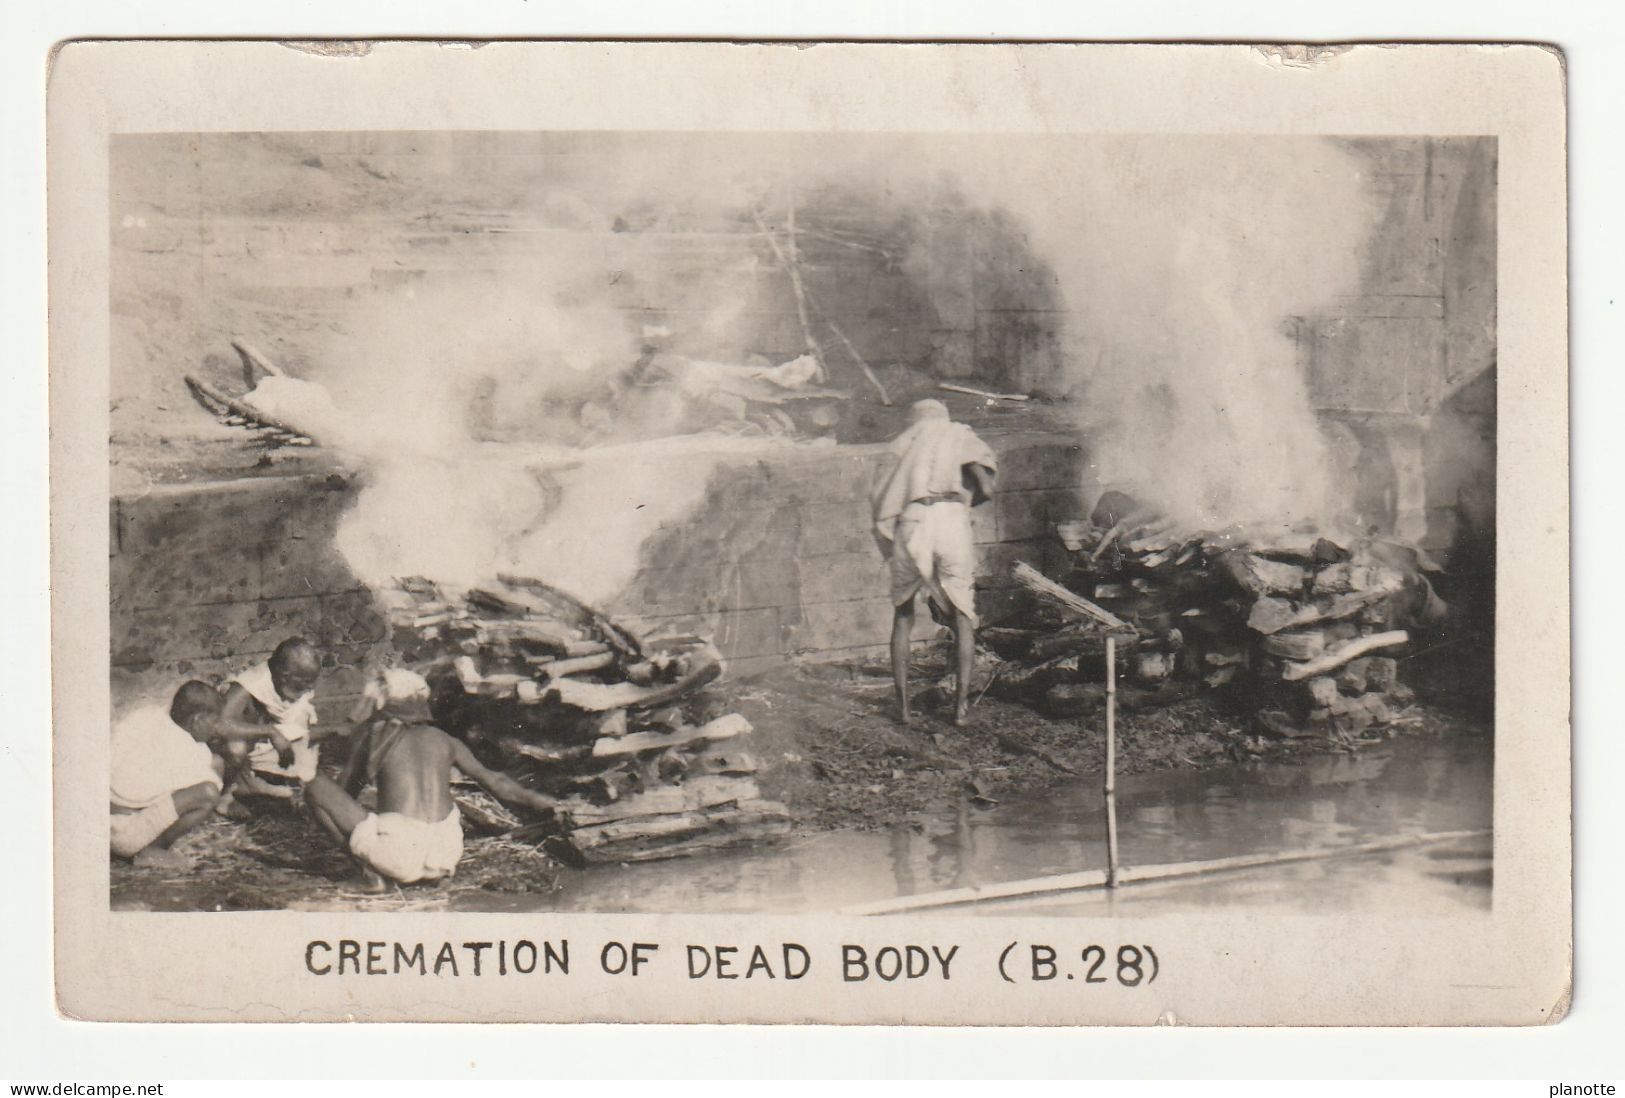 India  - Cremation Of Dead Body  - Old  Real Photo Standart Pc 1910/20s - Indien